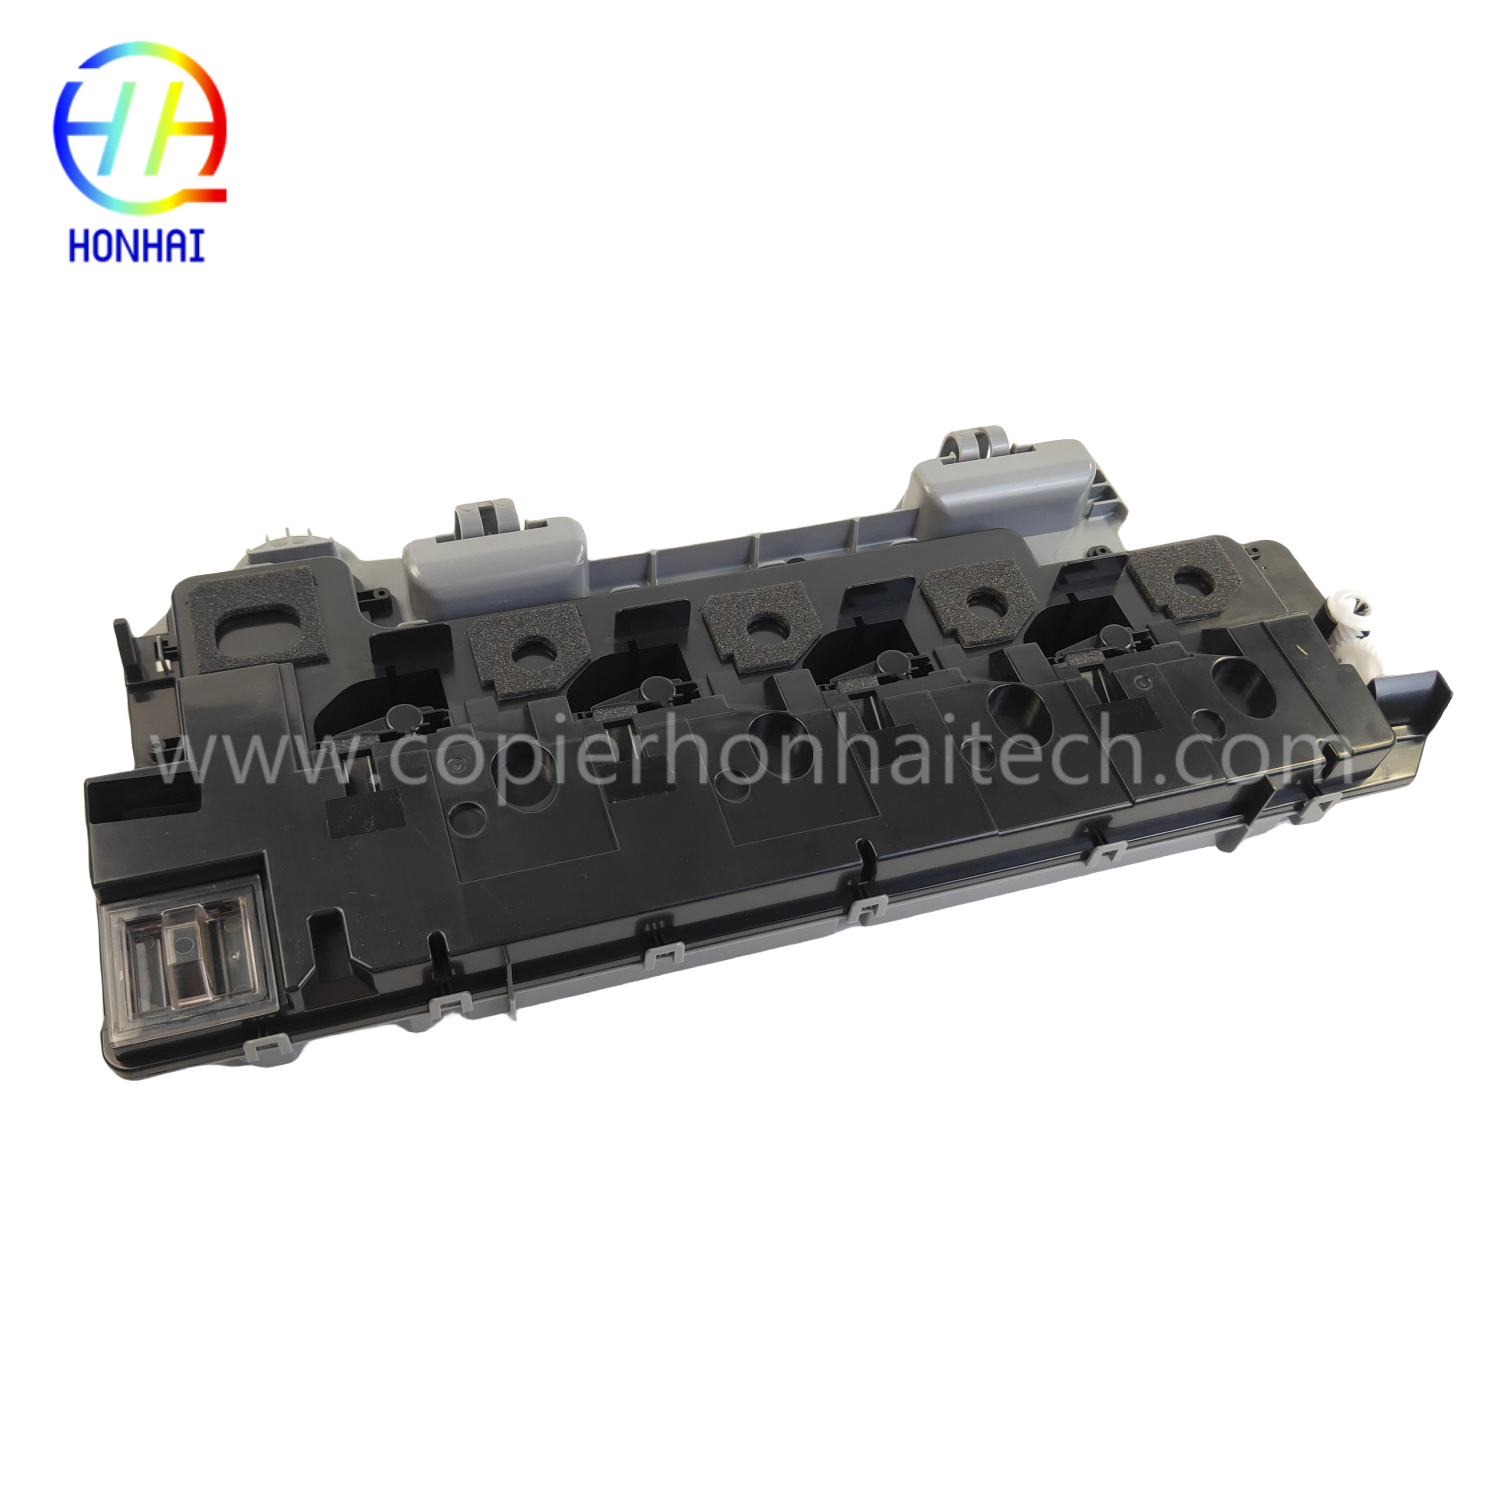 Waste Toner Container for Xerox C7020 7025 7030 7120 7125 7130 115R00128